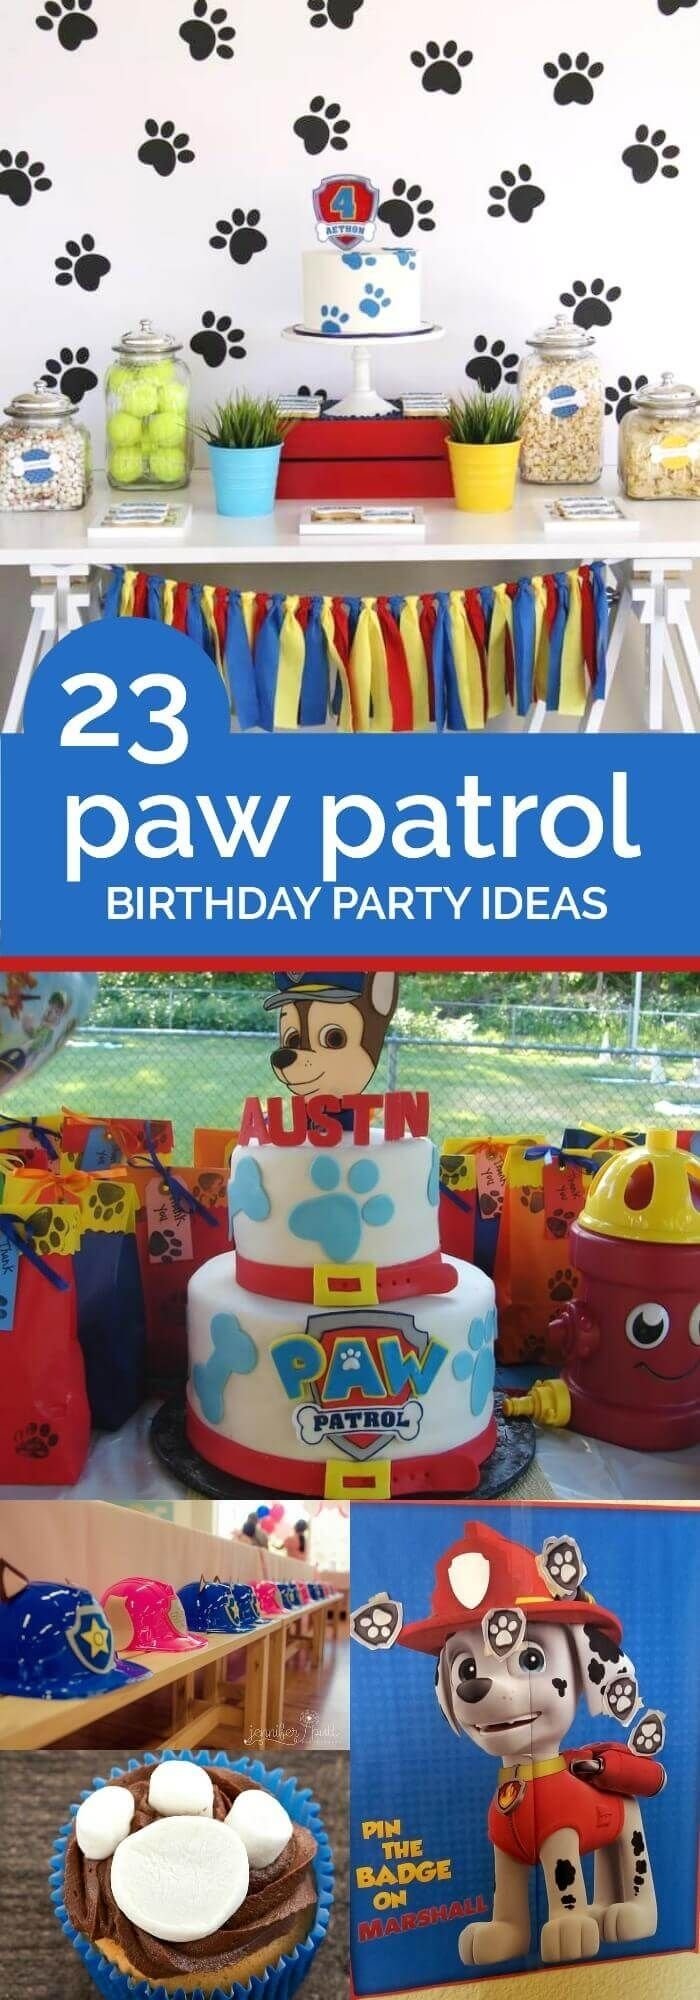 10 Ideal Birthday Party Ideas For Boys Age 6 158 best paw patrol party ideas images on pinterest 1 2022